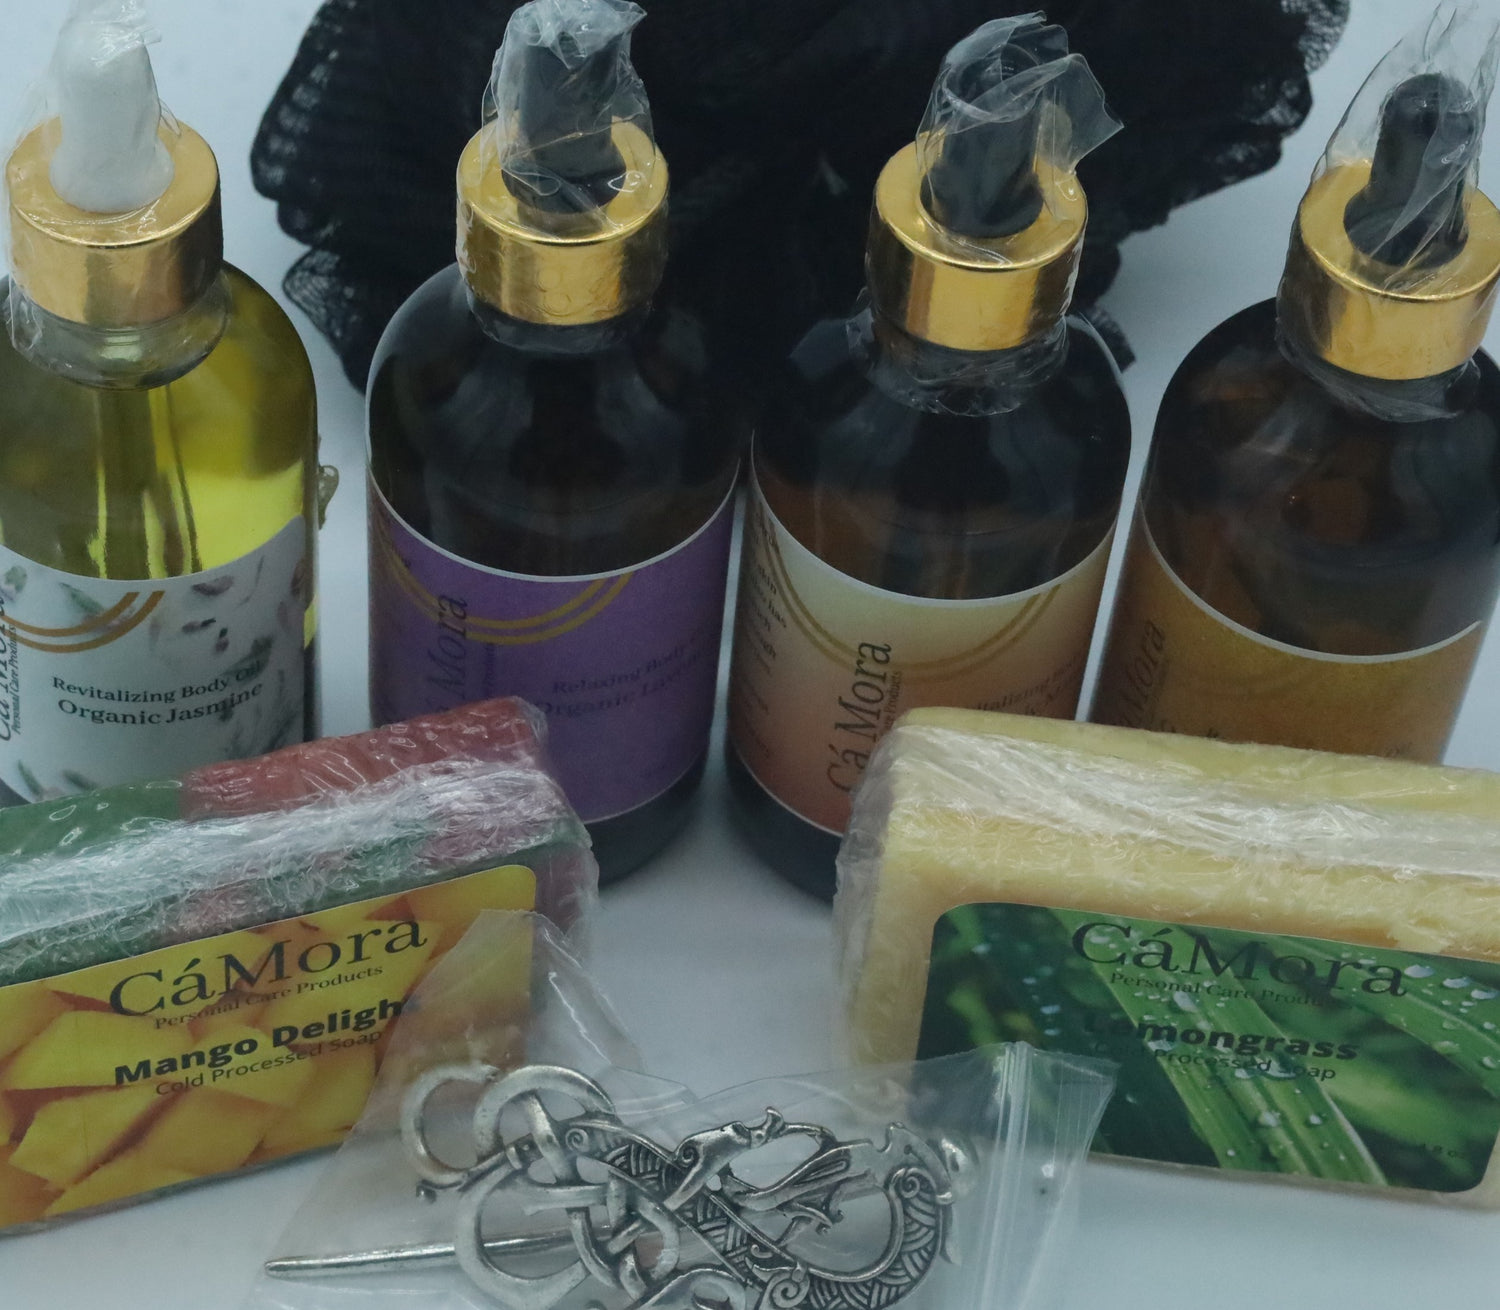 The collection of Ca'Mora body oil offers the best method for moisturizing dry skin.   Made with natural organic oils and essential oils, it will leave your skin soft.   Use our scented body oil to nurture glowing skin.  Ingredients: Organic Apricot Oil, Organic Sweet Almond Oil, Organic Jasmine, proprietary blend of essential oils.